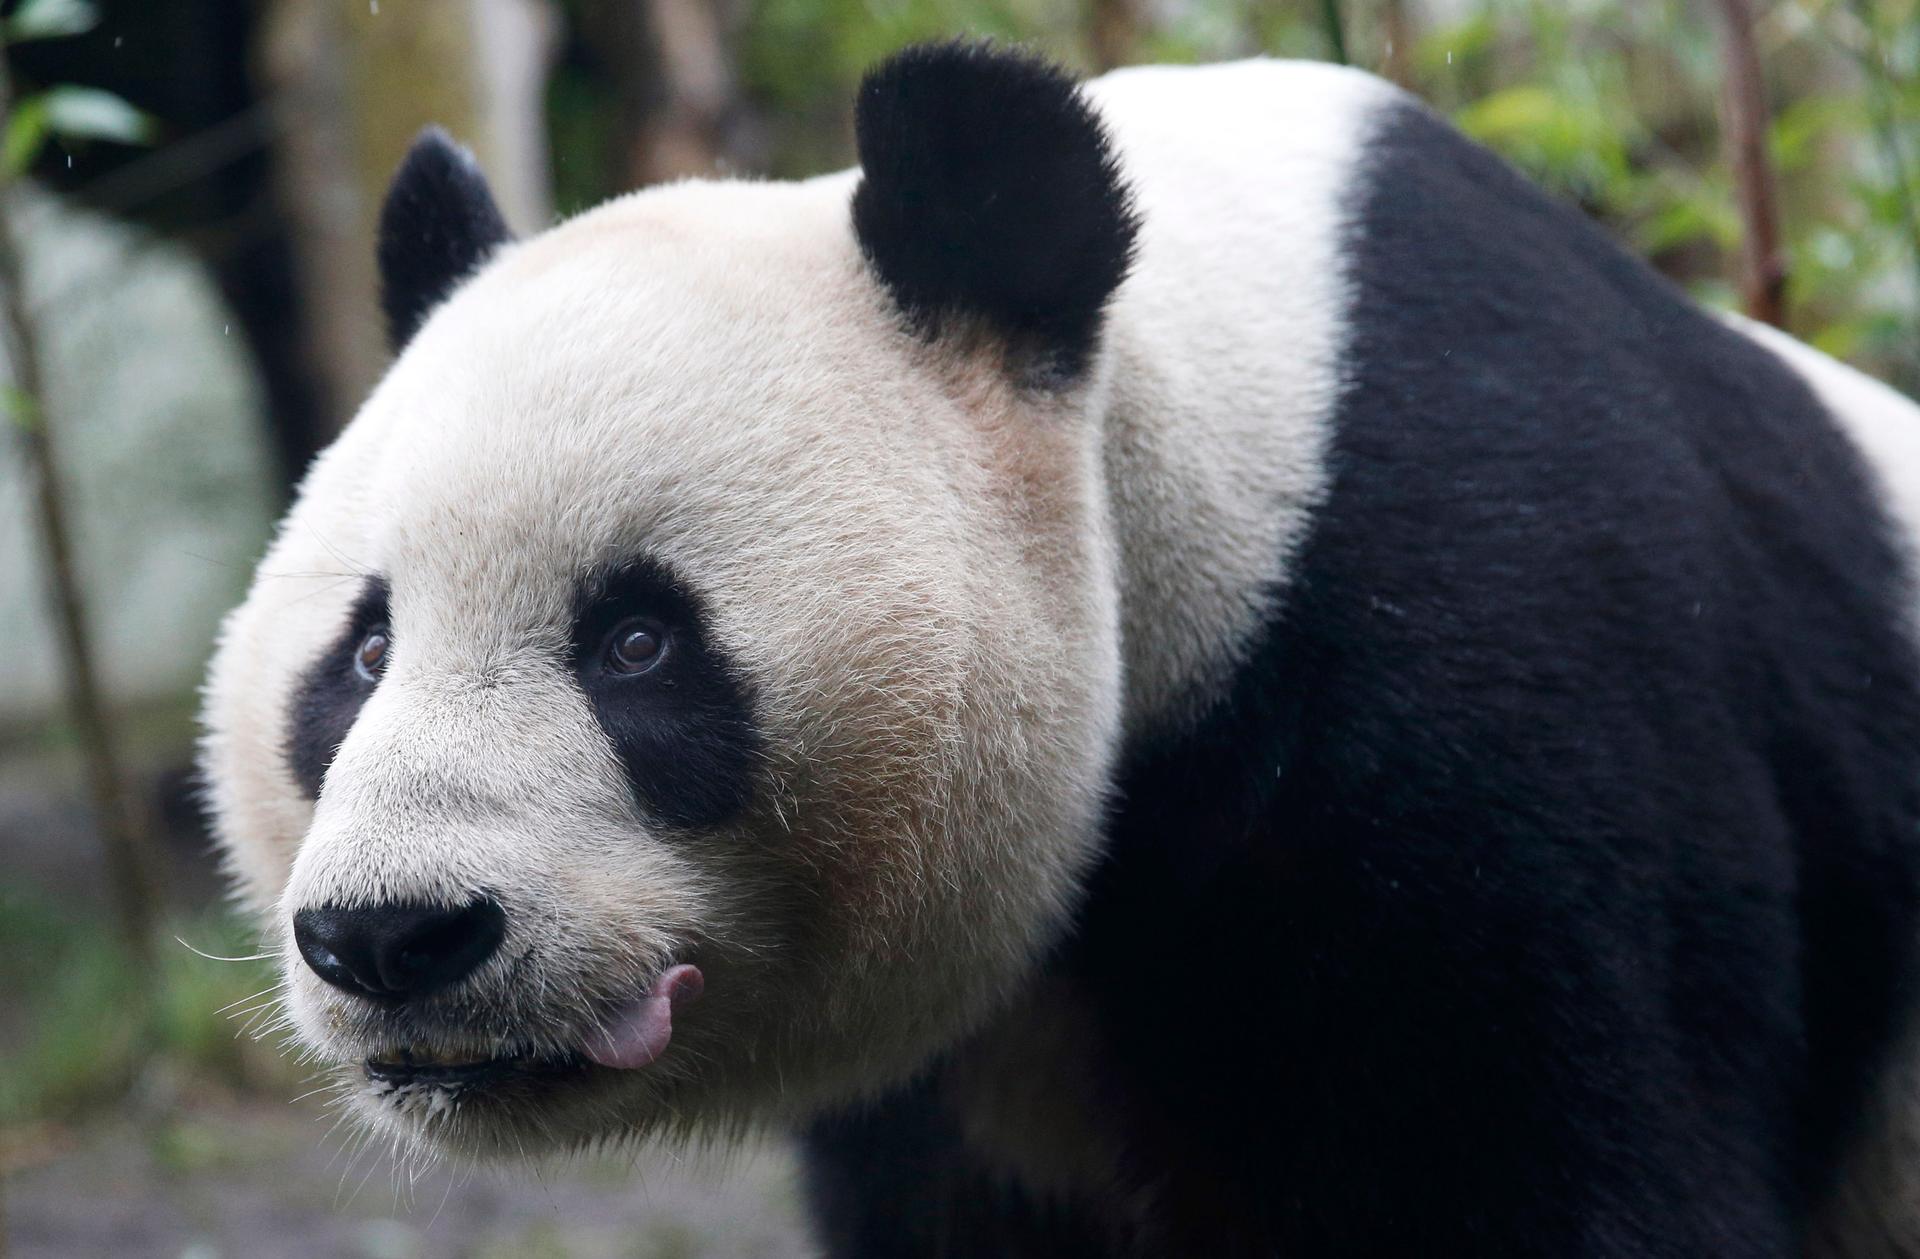 Tian Tian, a giant panda walks in the outdoor enclosure at Edinburgh Zoo ,Scotland April 12, 2016. The Royal Zoological Society of Scotland and Royal Botanic Garden Edinburgh will perform research into the complexity of the panda diet.